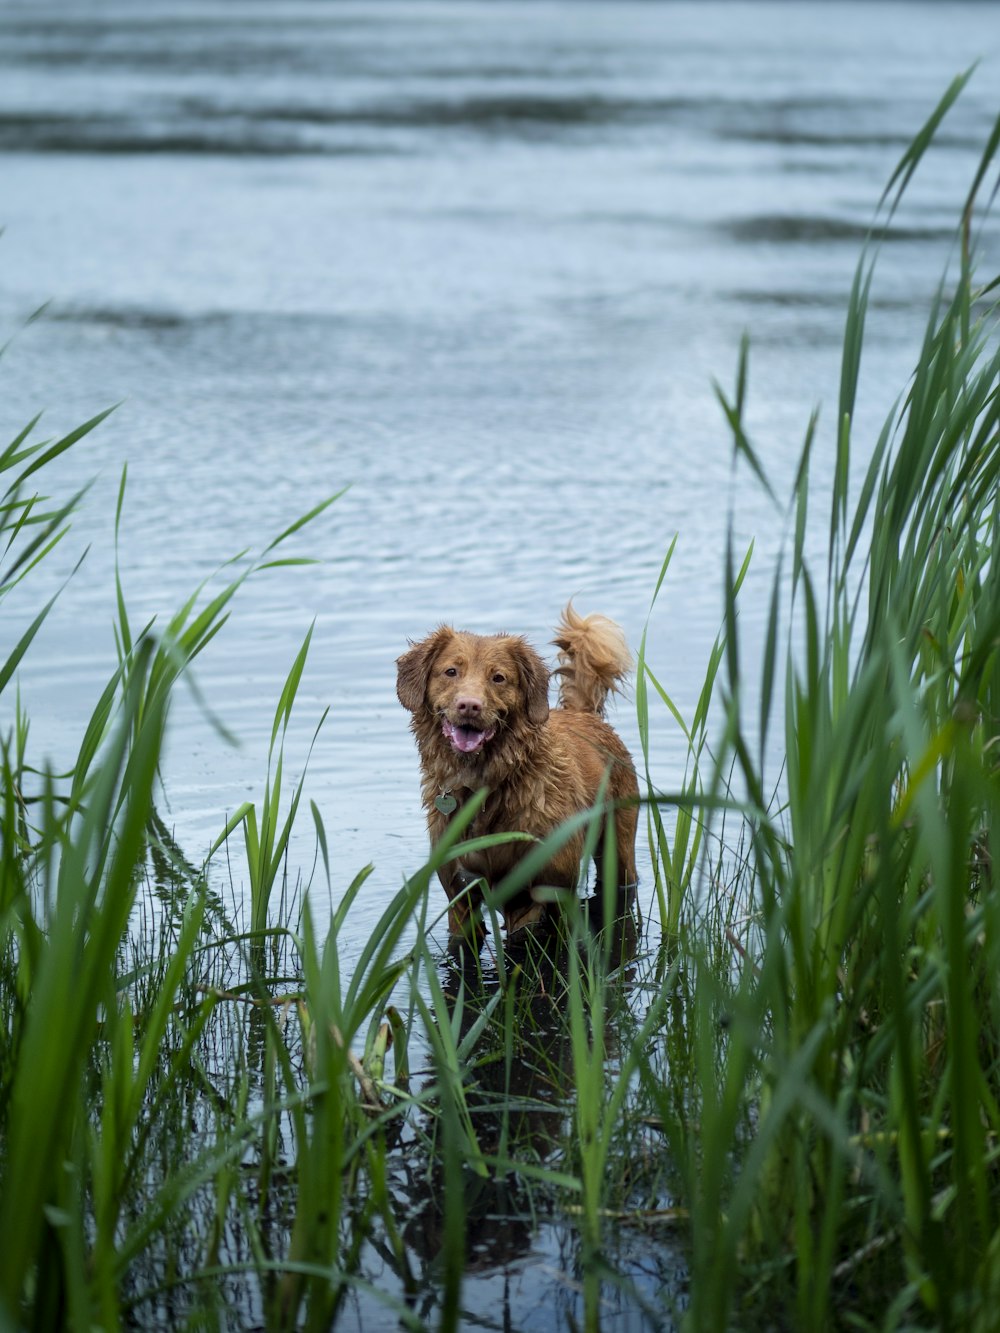 brown short coated dog on green grass field near body of water during daytime